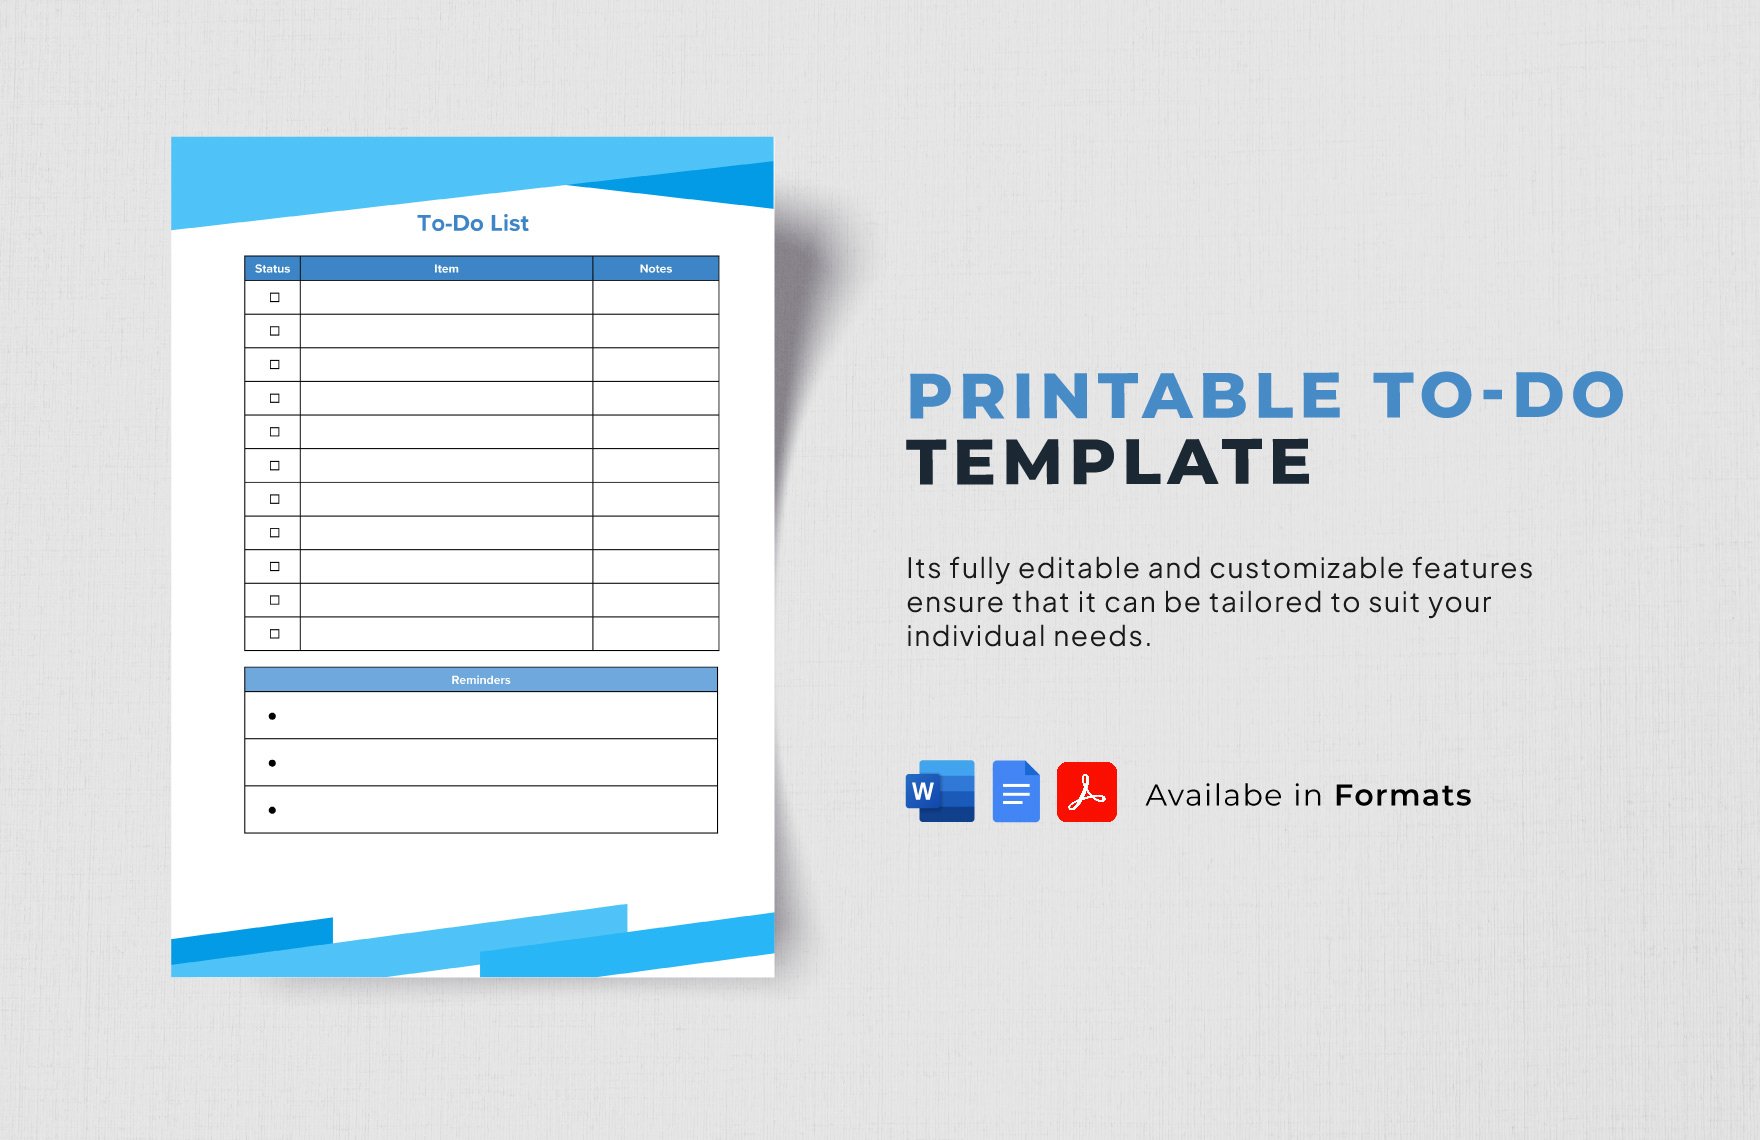 Free Printable To-Do Template in Word, Google Docs, PDF